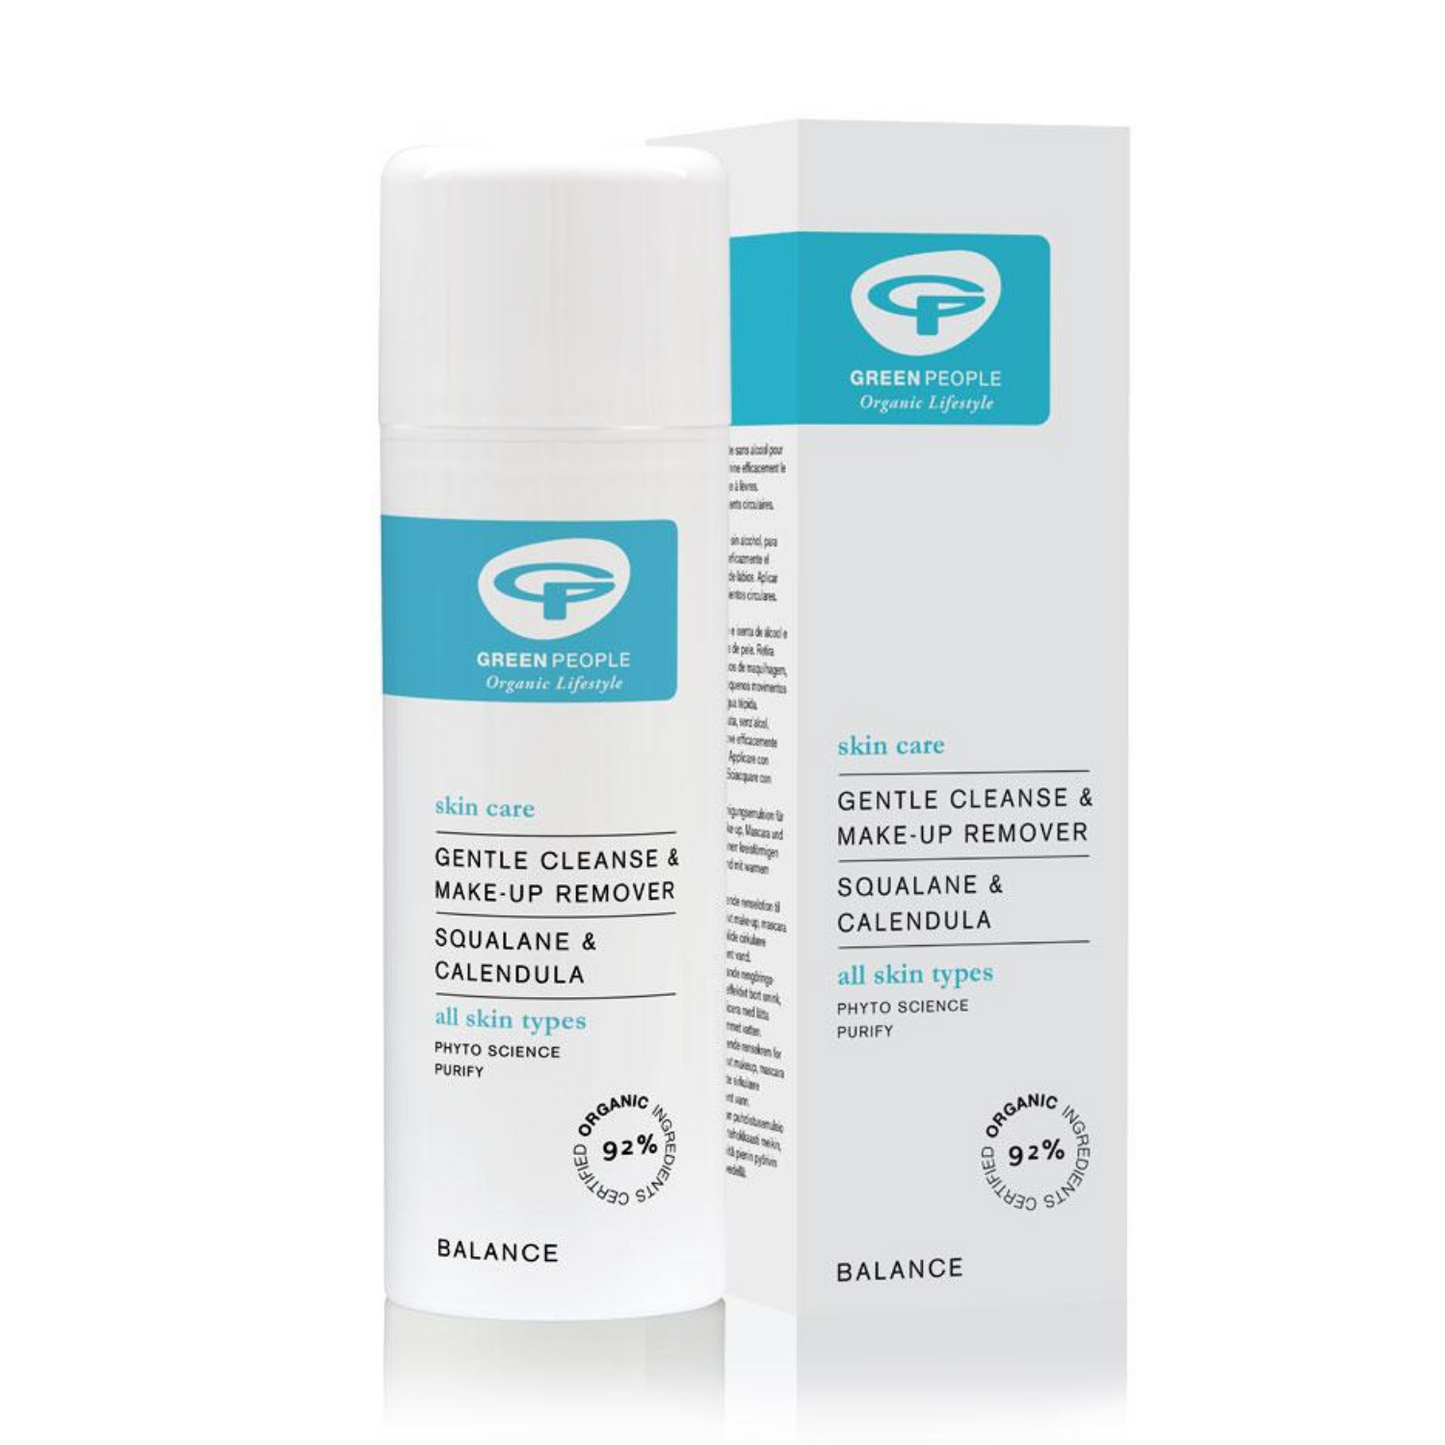 Green People Gentle Cleanse & Make-up Remover, 150ml.